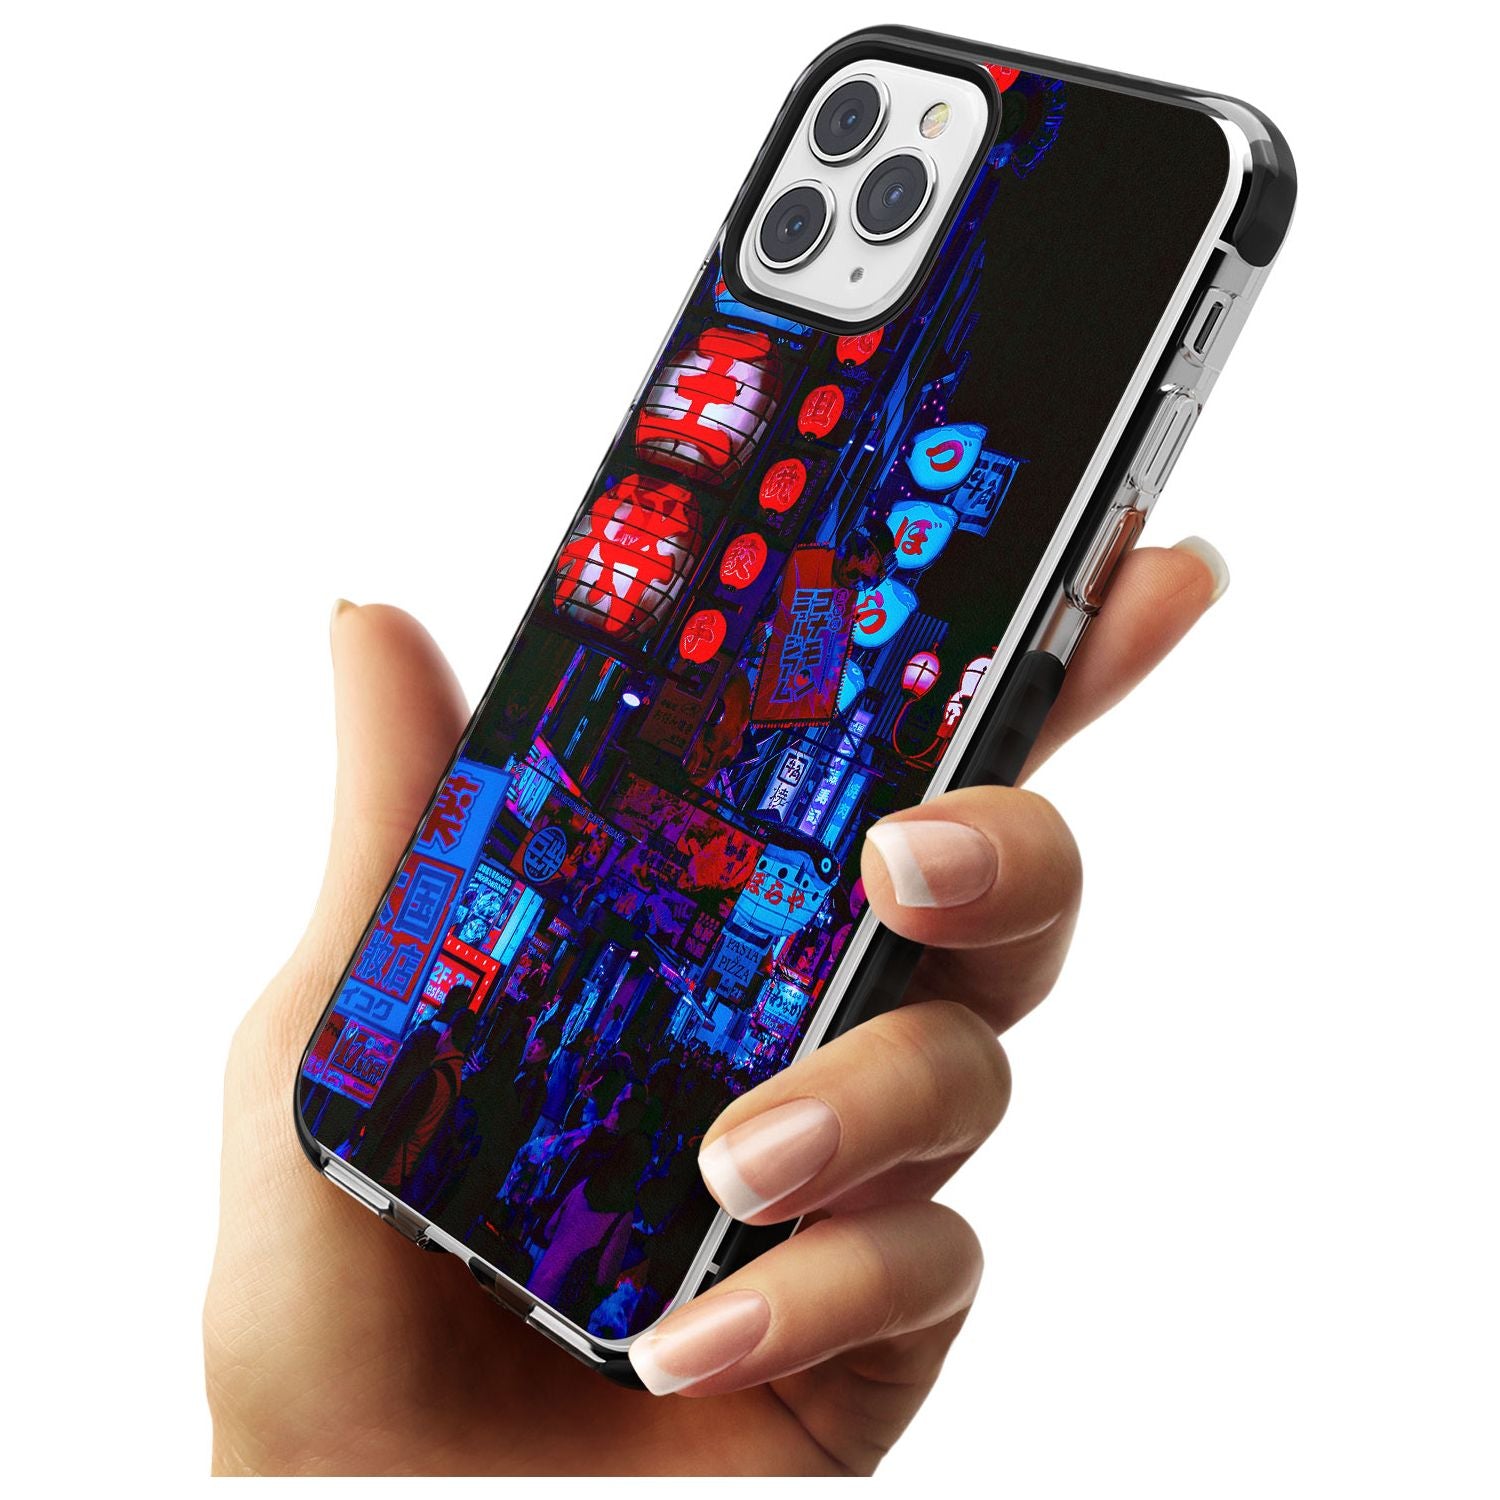 Red & Turquoise - Neon Cities Photographs Black Impact Phone Case for iPhone 11 Pro Max